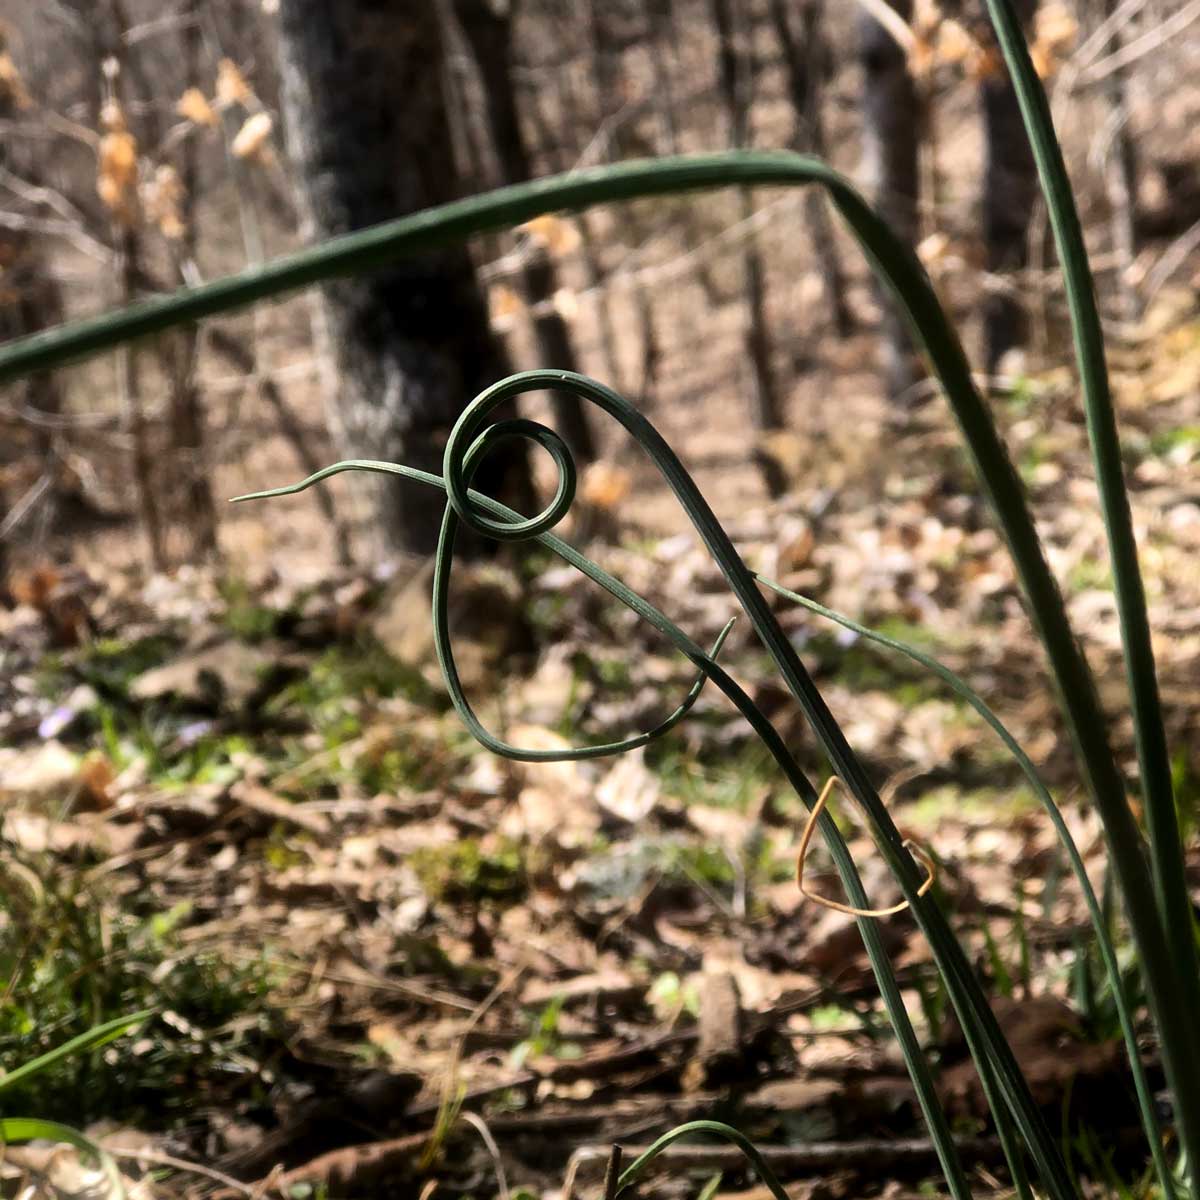 A spiral curly-q on a wild onion unfurling.